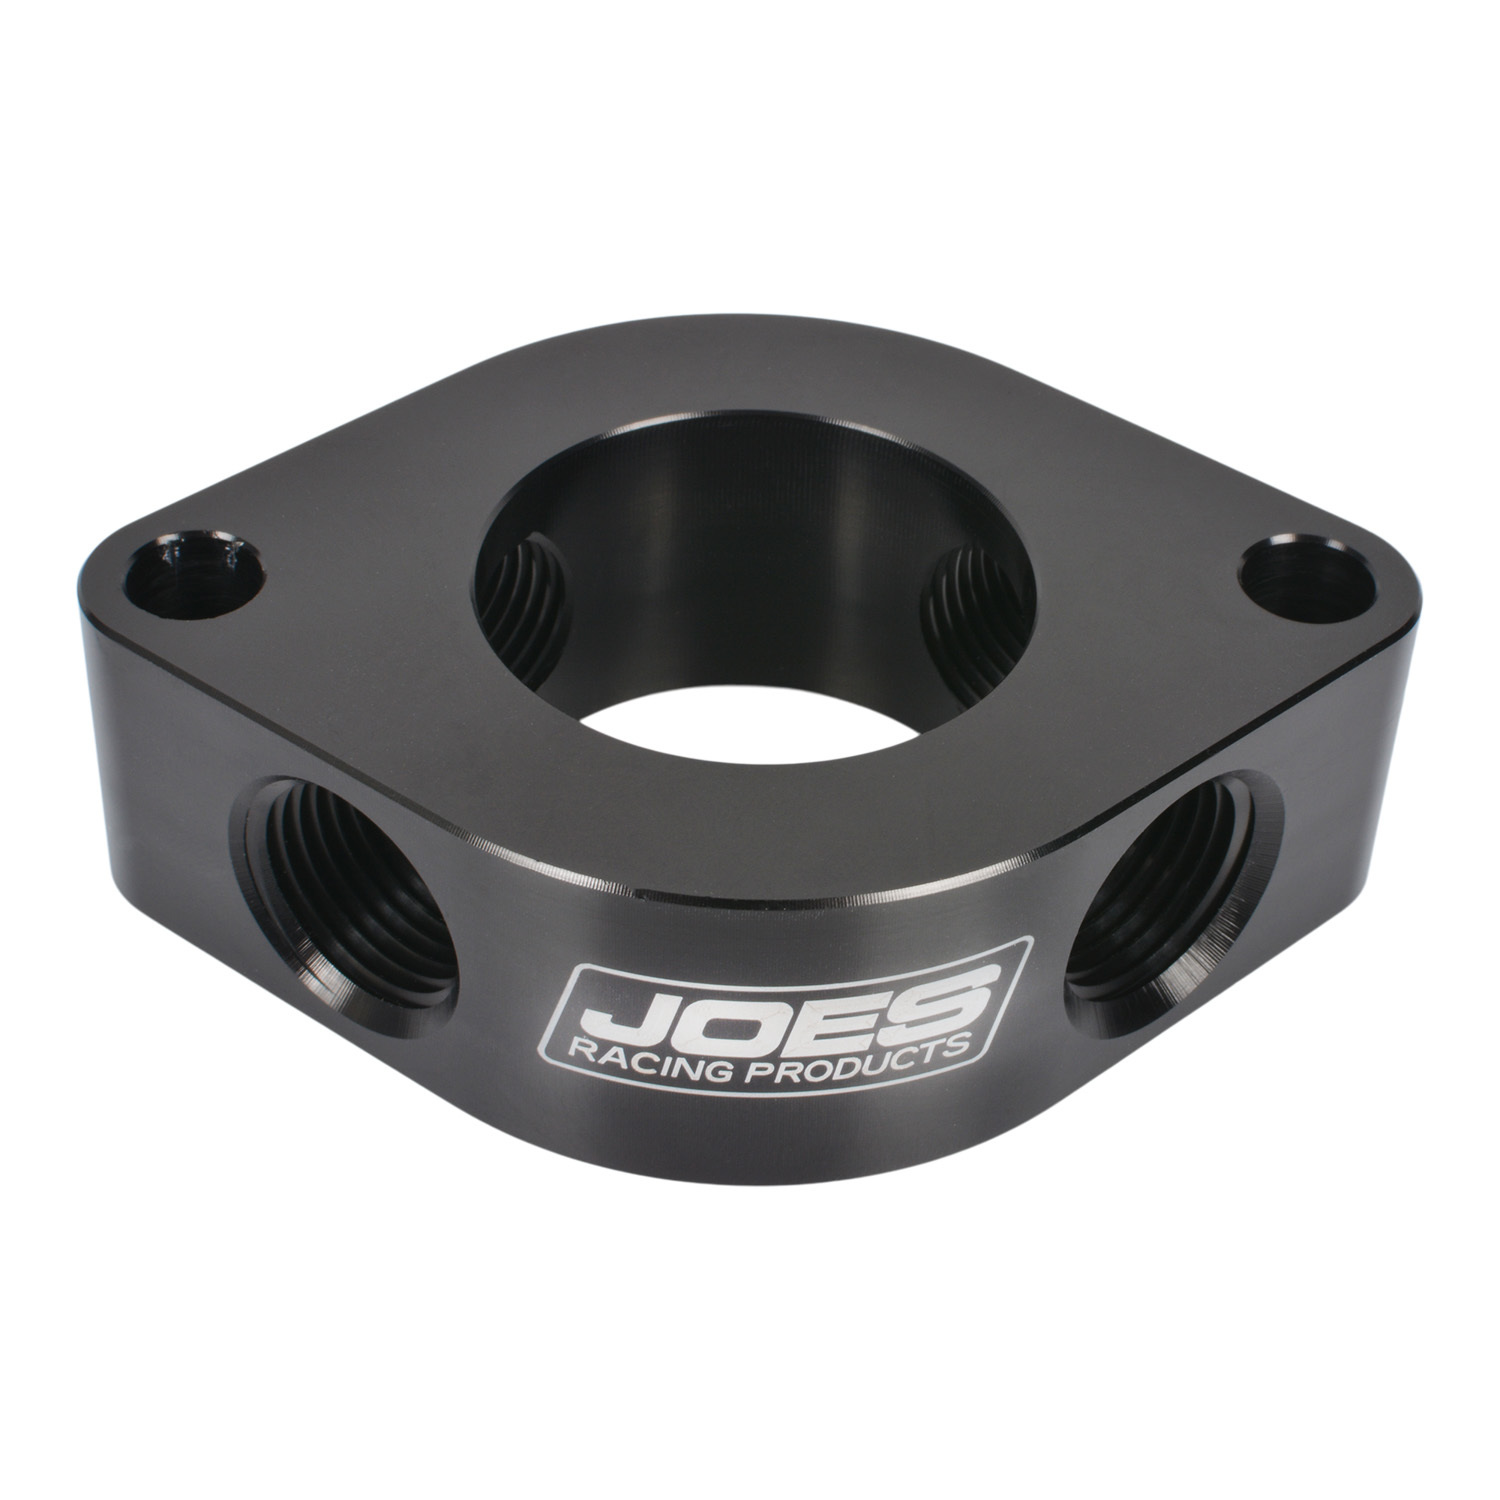 Joes Racing Products 36025-V2 Water Neck Spacer, 1-1/8 in Thick, Four 1/2 in NPT Female Ports, O-Ring, Aluminum, Black Anodized, Chevy V8, Each